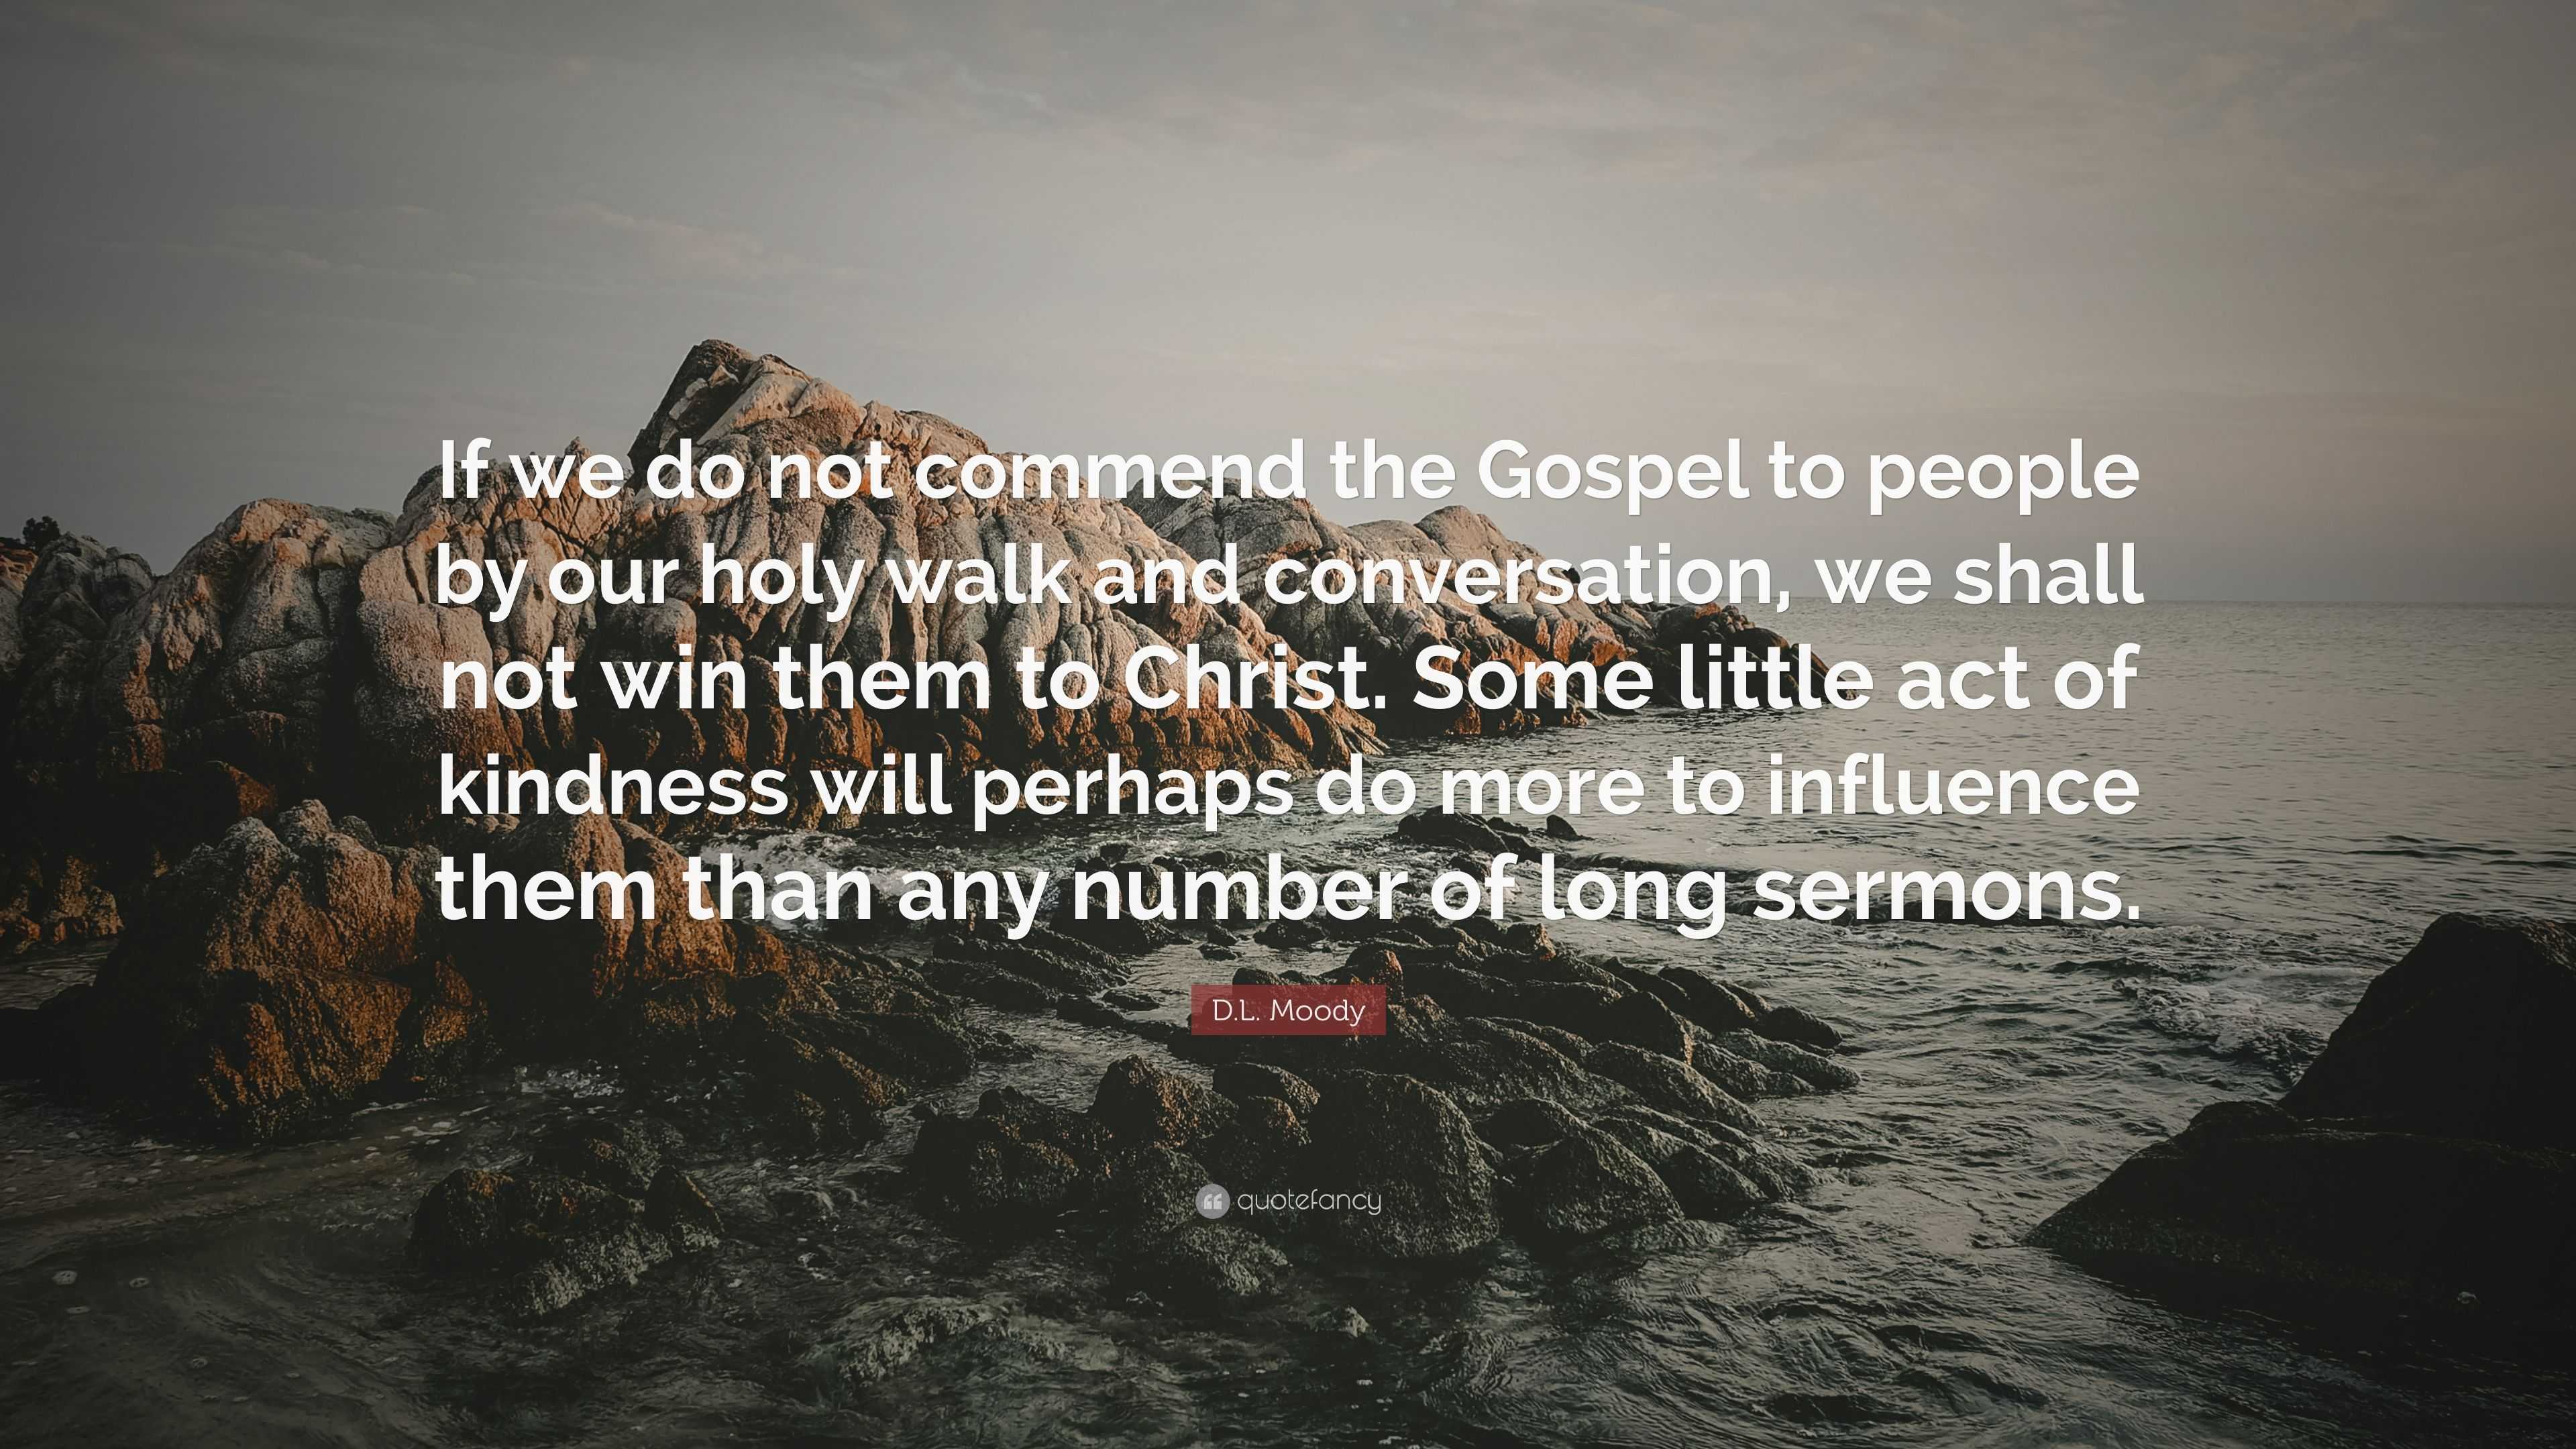 D.L. Moody Quote: “If we do not commend the Gospel to people by our ...